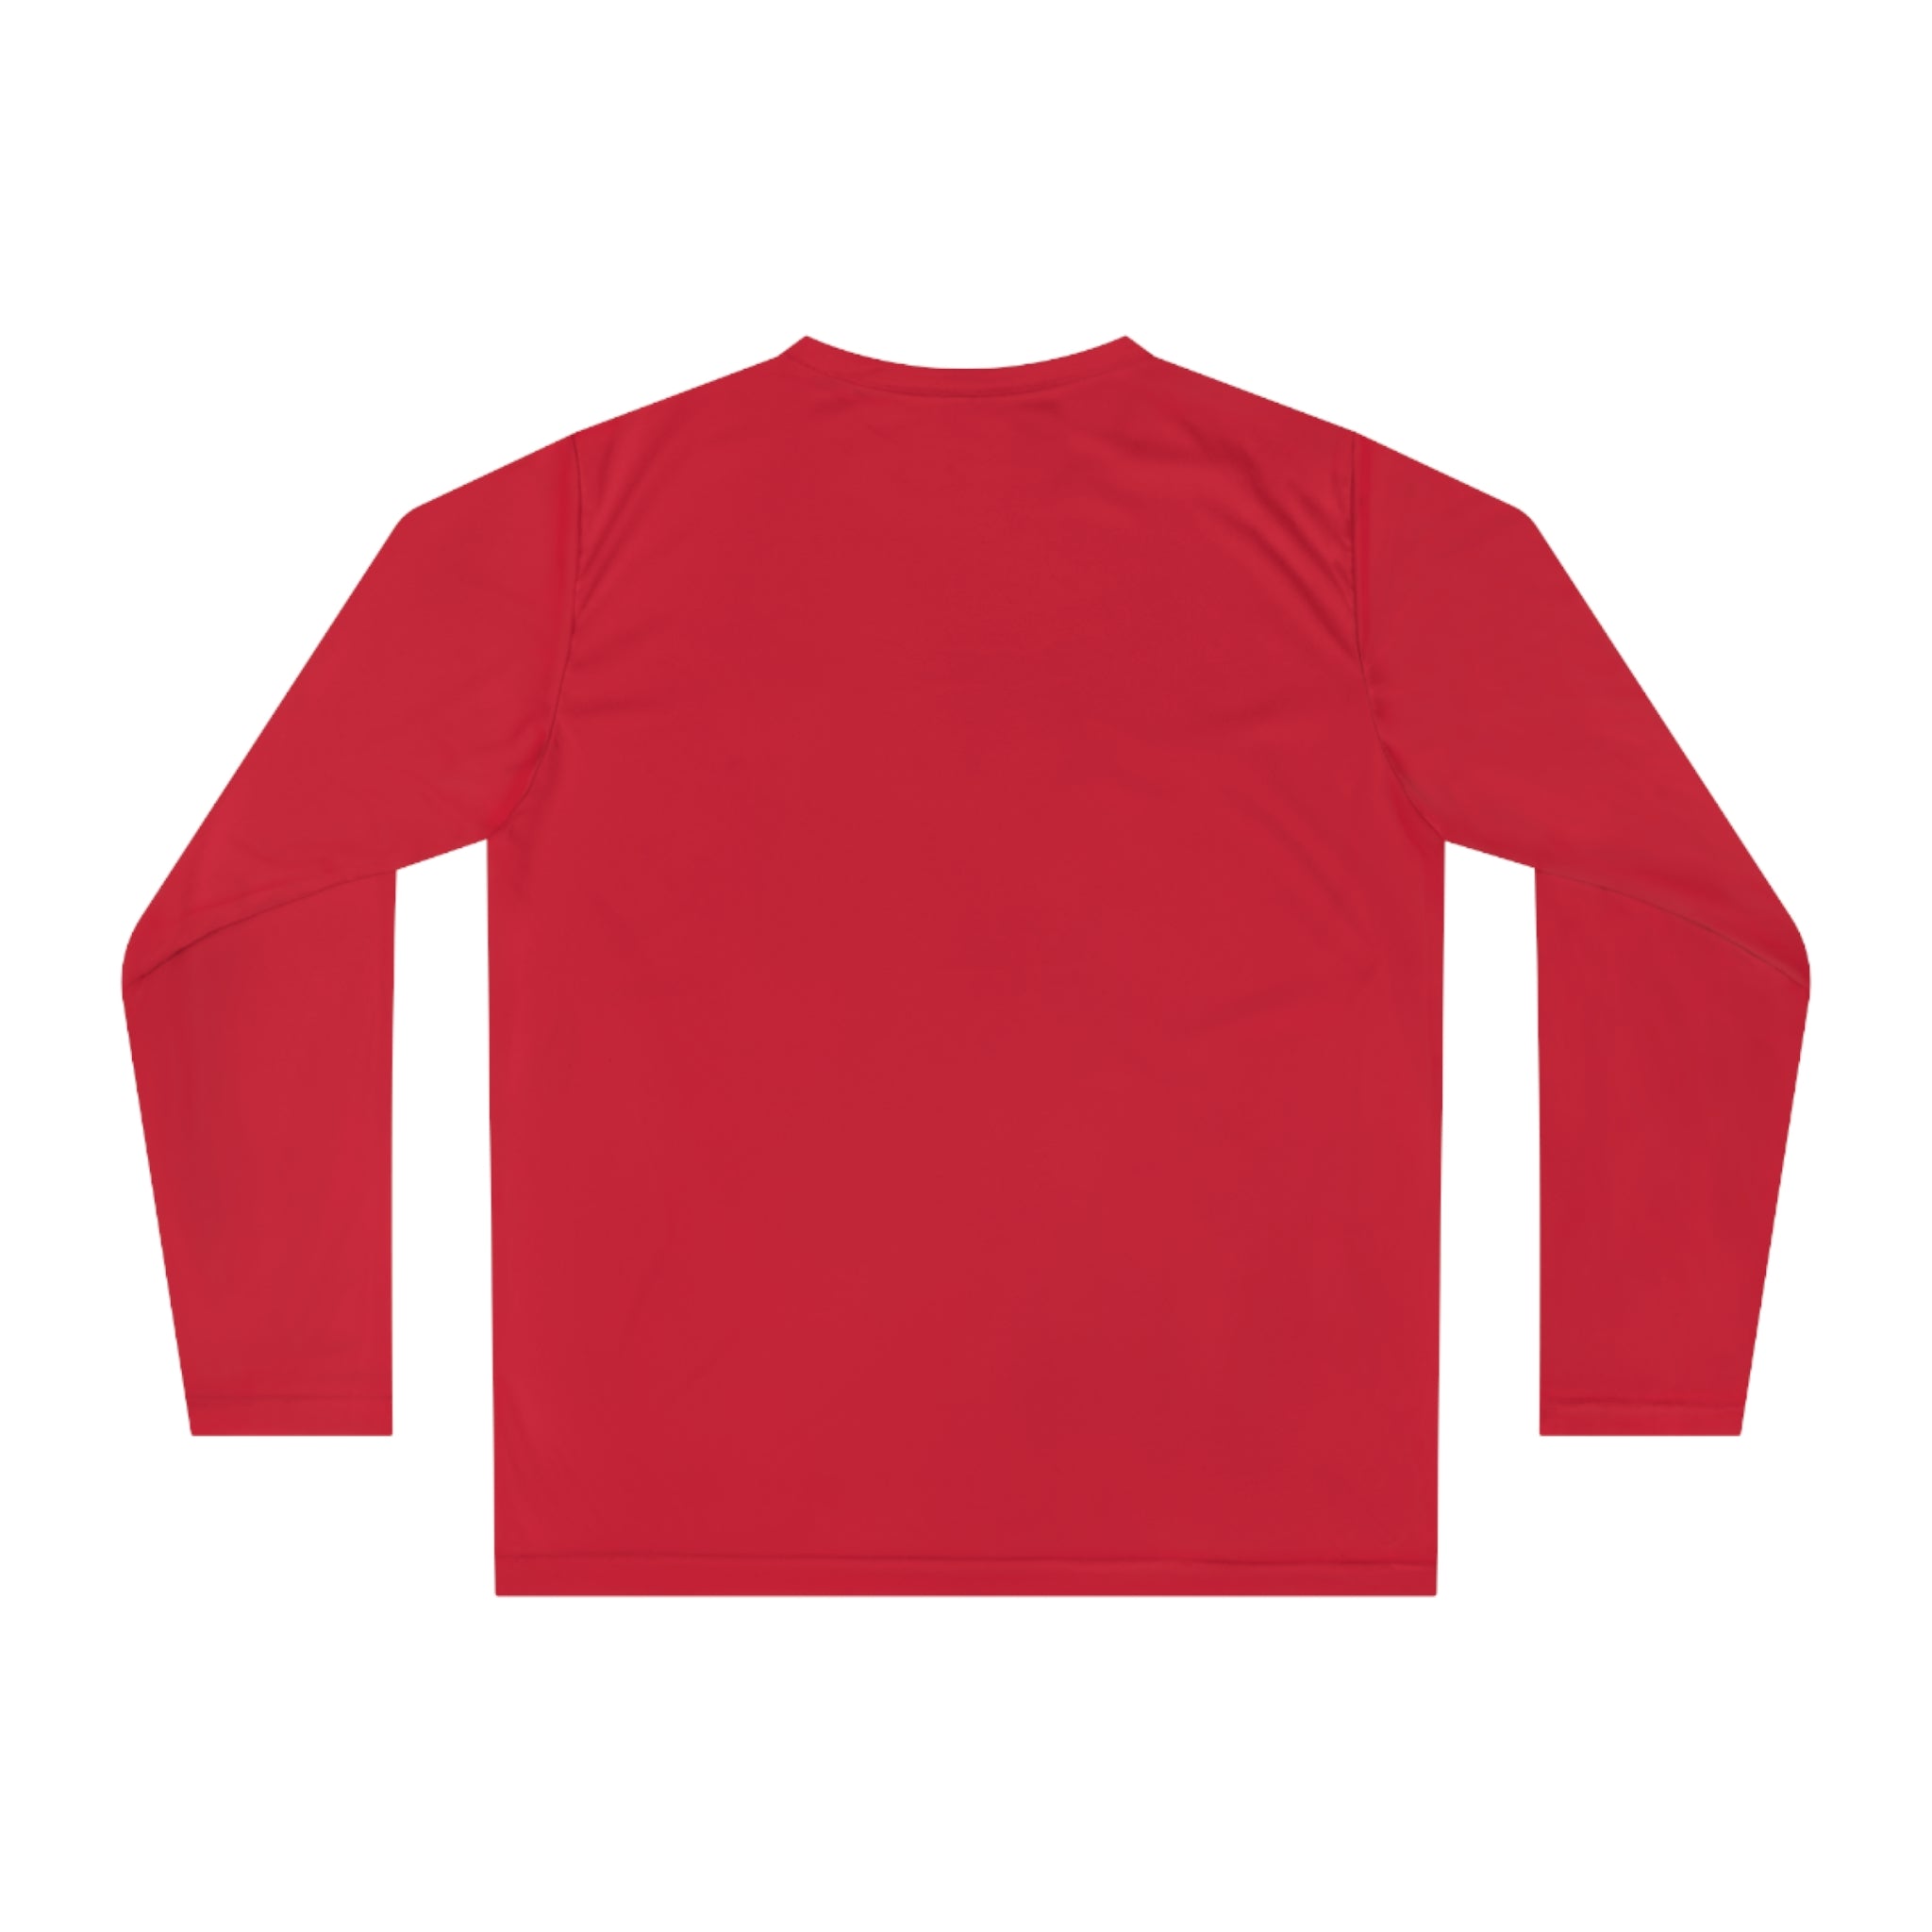 Retro Vibe Lower Greenville Athletic Long Sleeve Shirt - Friends of Lower Greenville